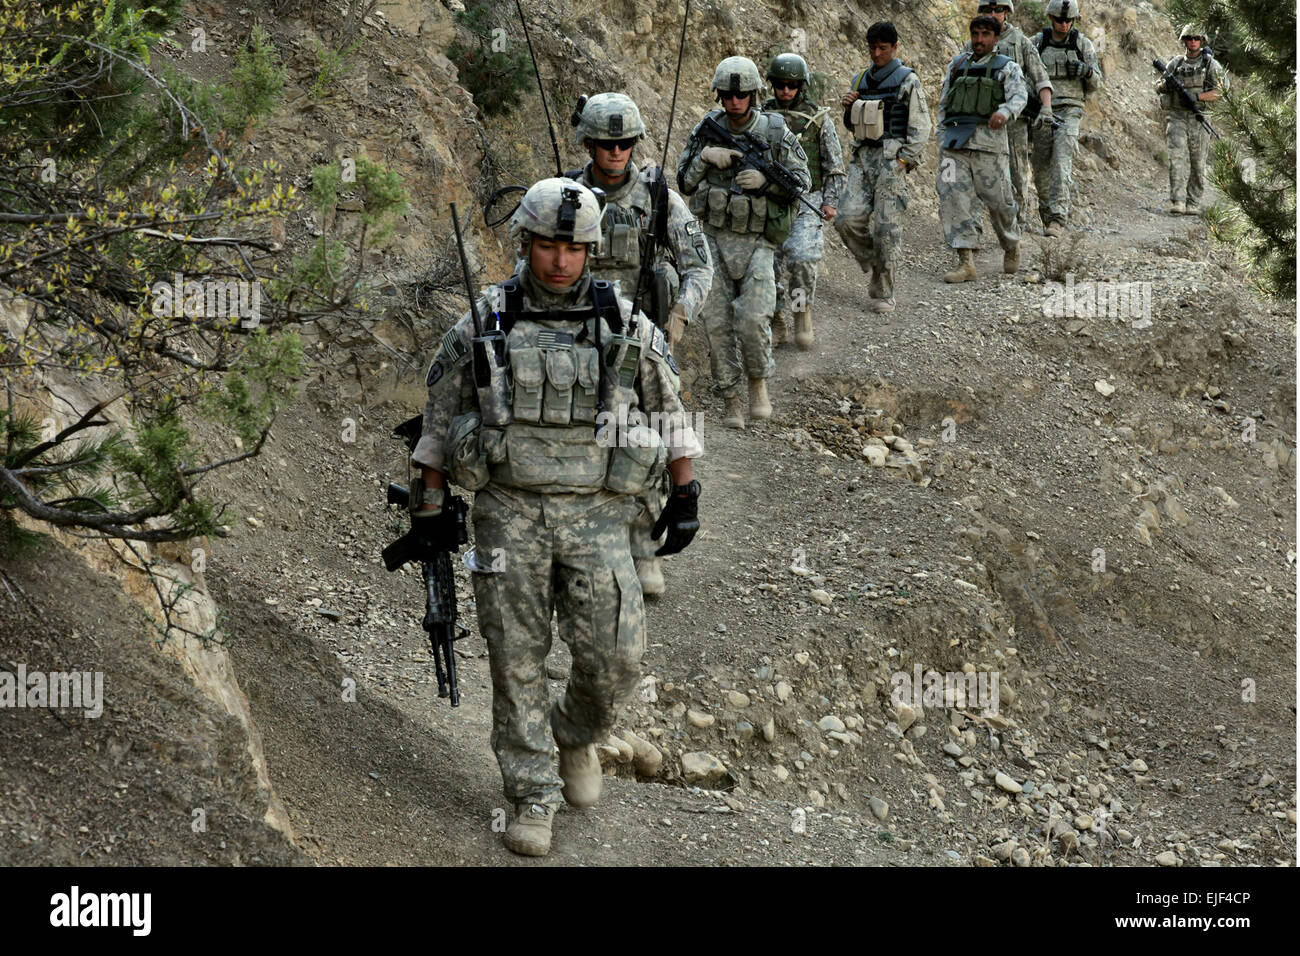 U.S. Soldiers with Apache Troop, 1st Squadron, 40th Cavalry Regiment, and Afghan Border Police walk along a mountain trail during a patrol near Combat Outpost Herrera in the Paktiya province of Afghanistan Oct. 13, 2009.  Army Staff Sgt. Andrew Smith Stock Photo